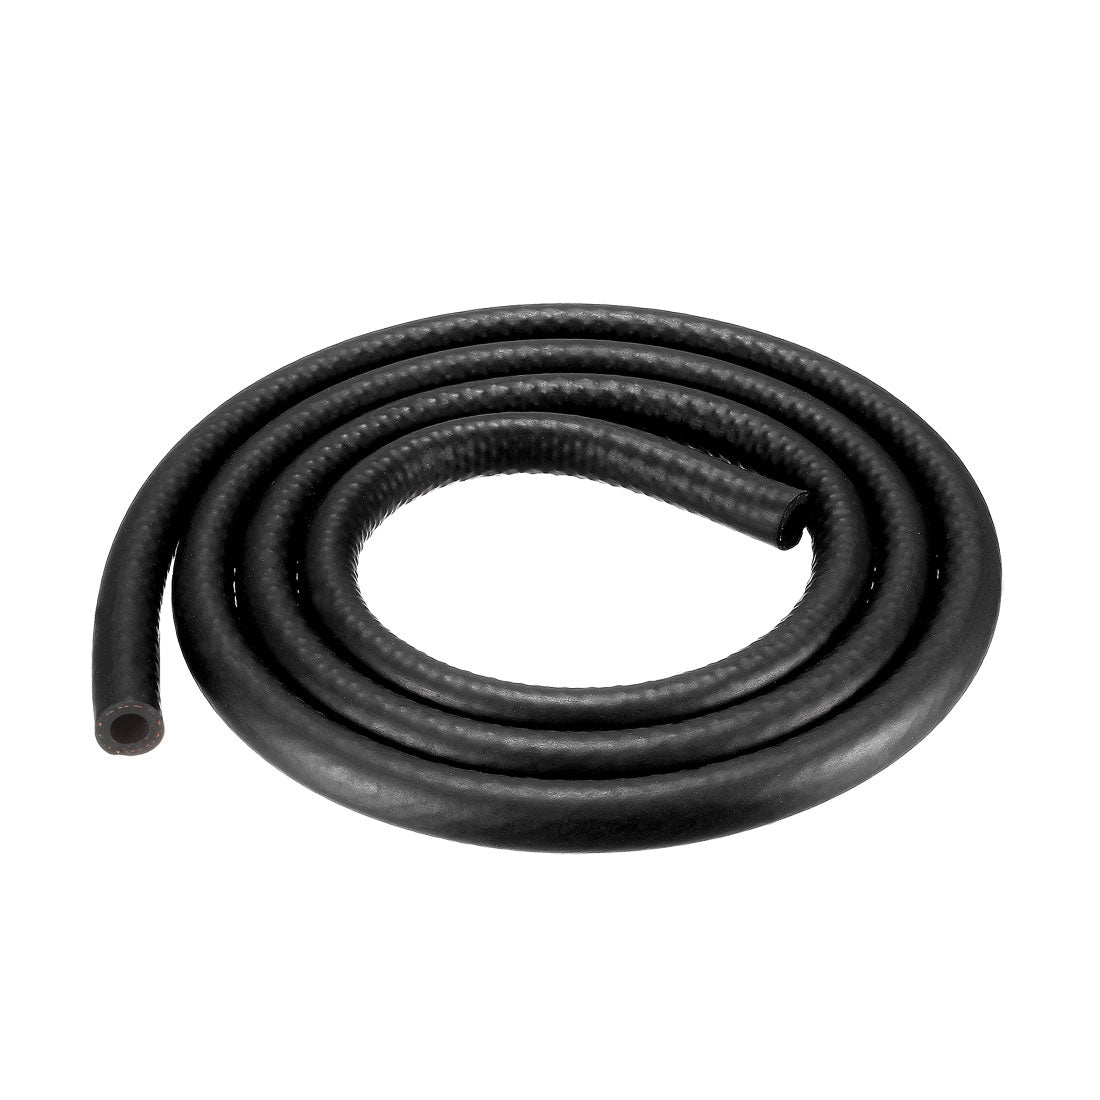 uxcell Uxcell Fuel Line Fuel Hose Rubber  8mm I.D.  1.5M/ 5Ft  Diesel Petrol Hose Engine Pipe Tubing